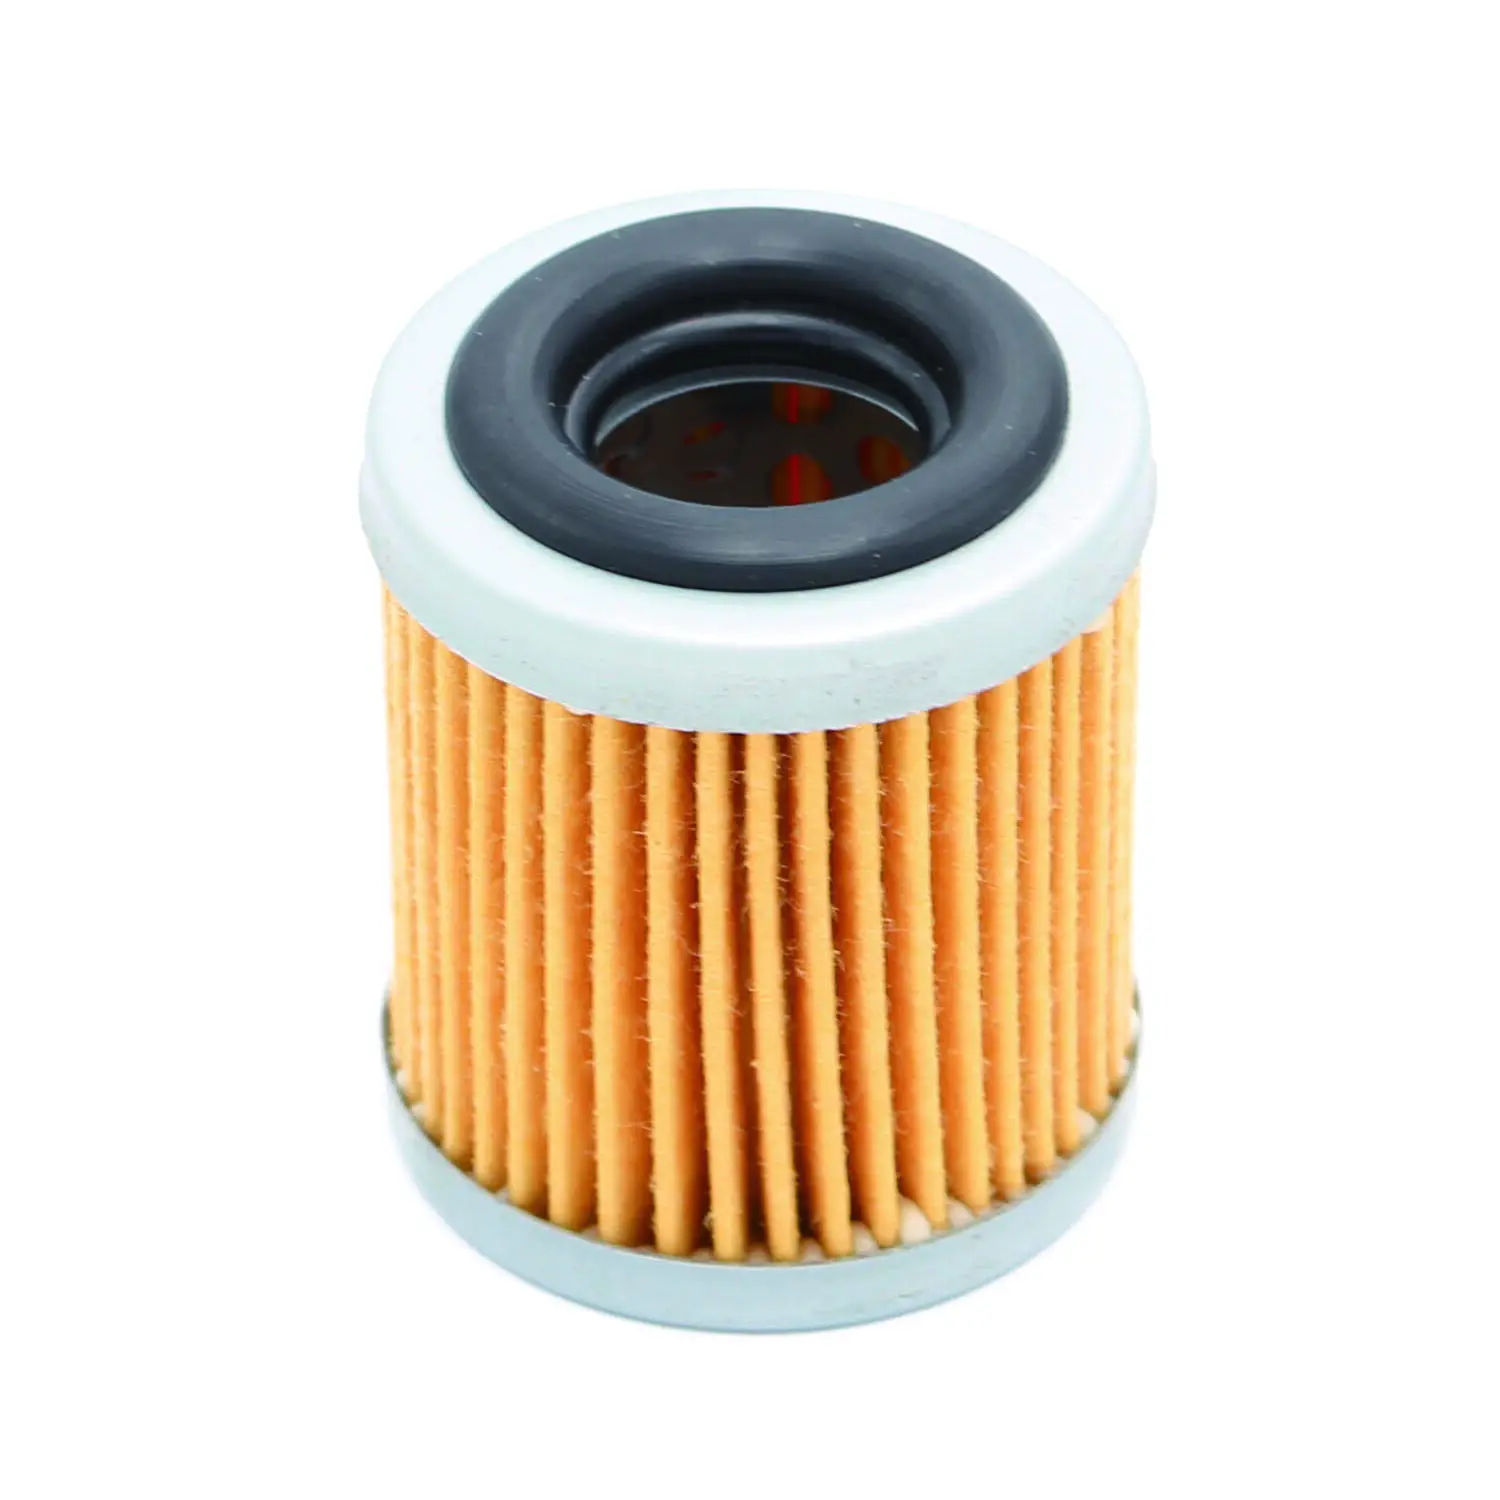 

Transmission Oil Cooler Filter For Nissan For Altima 2.5L For Juke For Rogue For Sentra 2824A006 31726-1XF00 Car Accessories